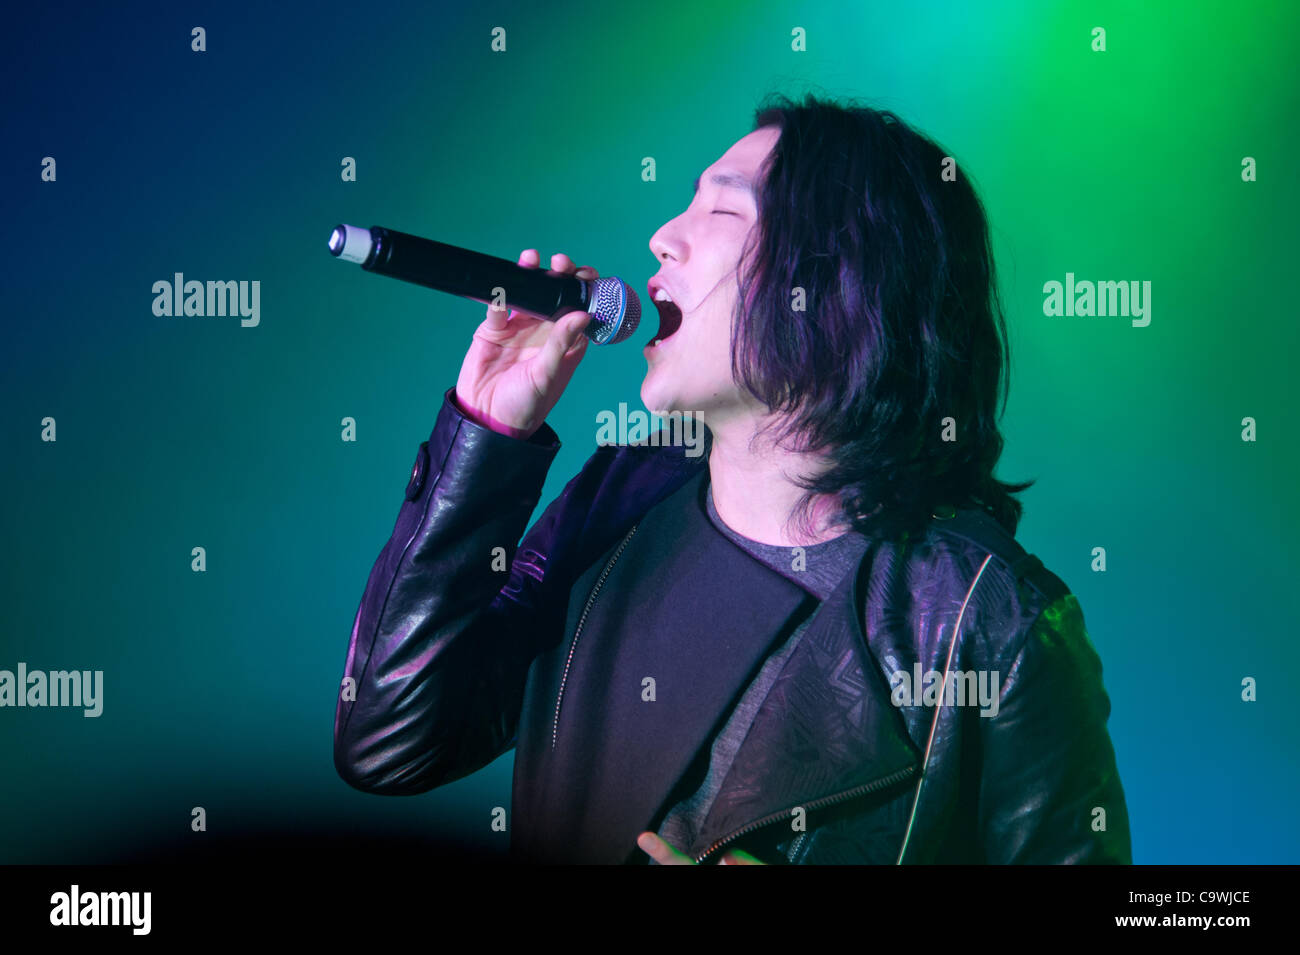 LINCOLN, CA - February 24: Eddie Shin with Aziatix performs at Thunder Valley Casino Resort in Lincoln, California on February 24, 2012 Stock Photo